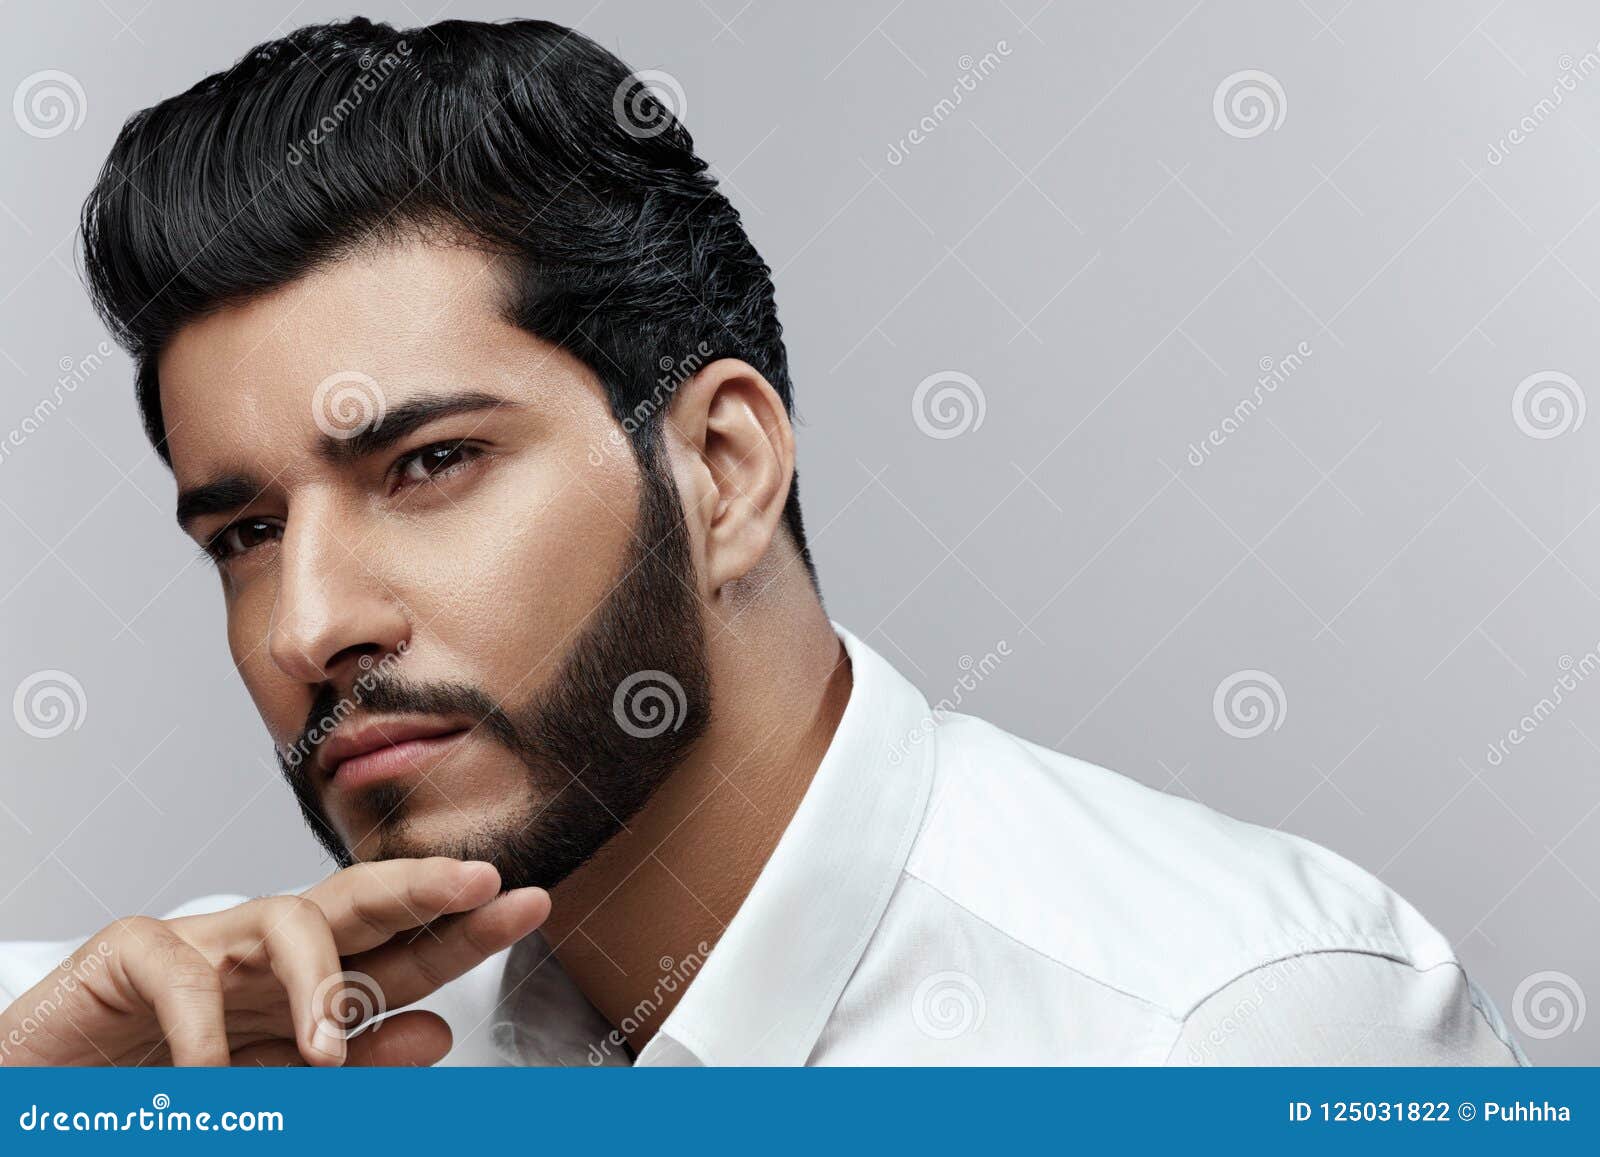 Beauty. Man with Hair Style and Beard Portrait Stock Photo - Image of  masculine, care: 125031822